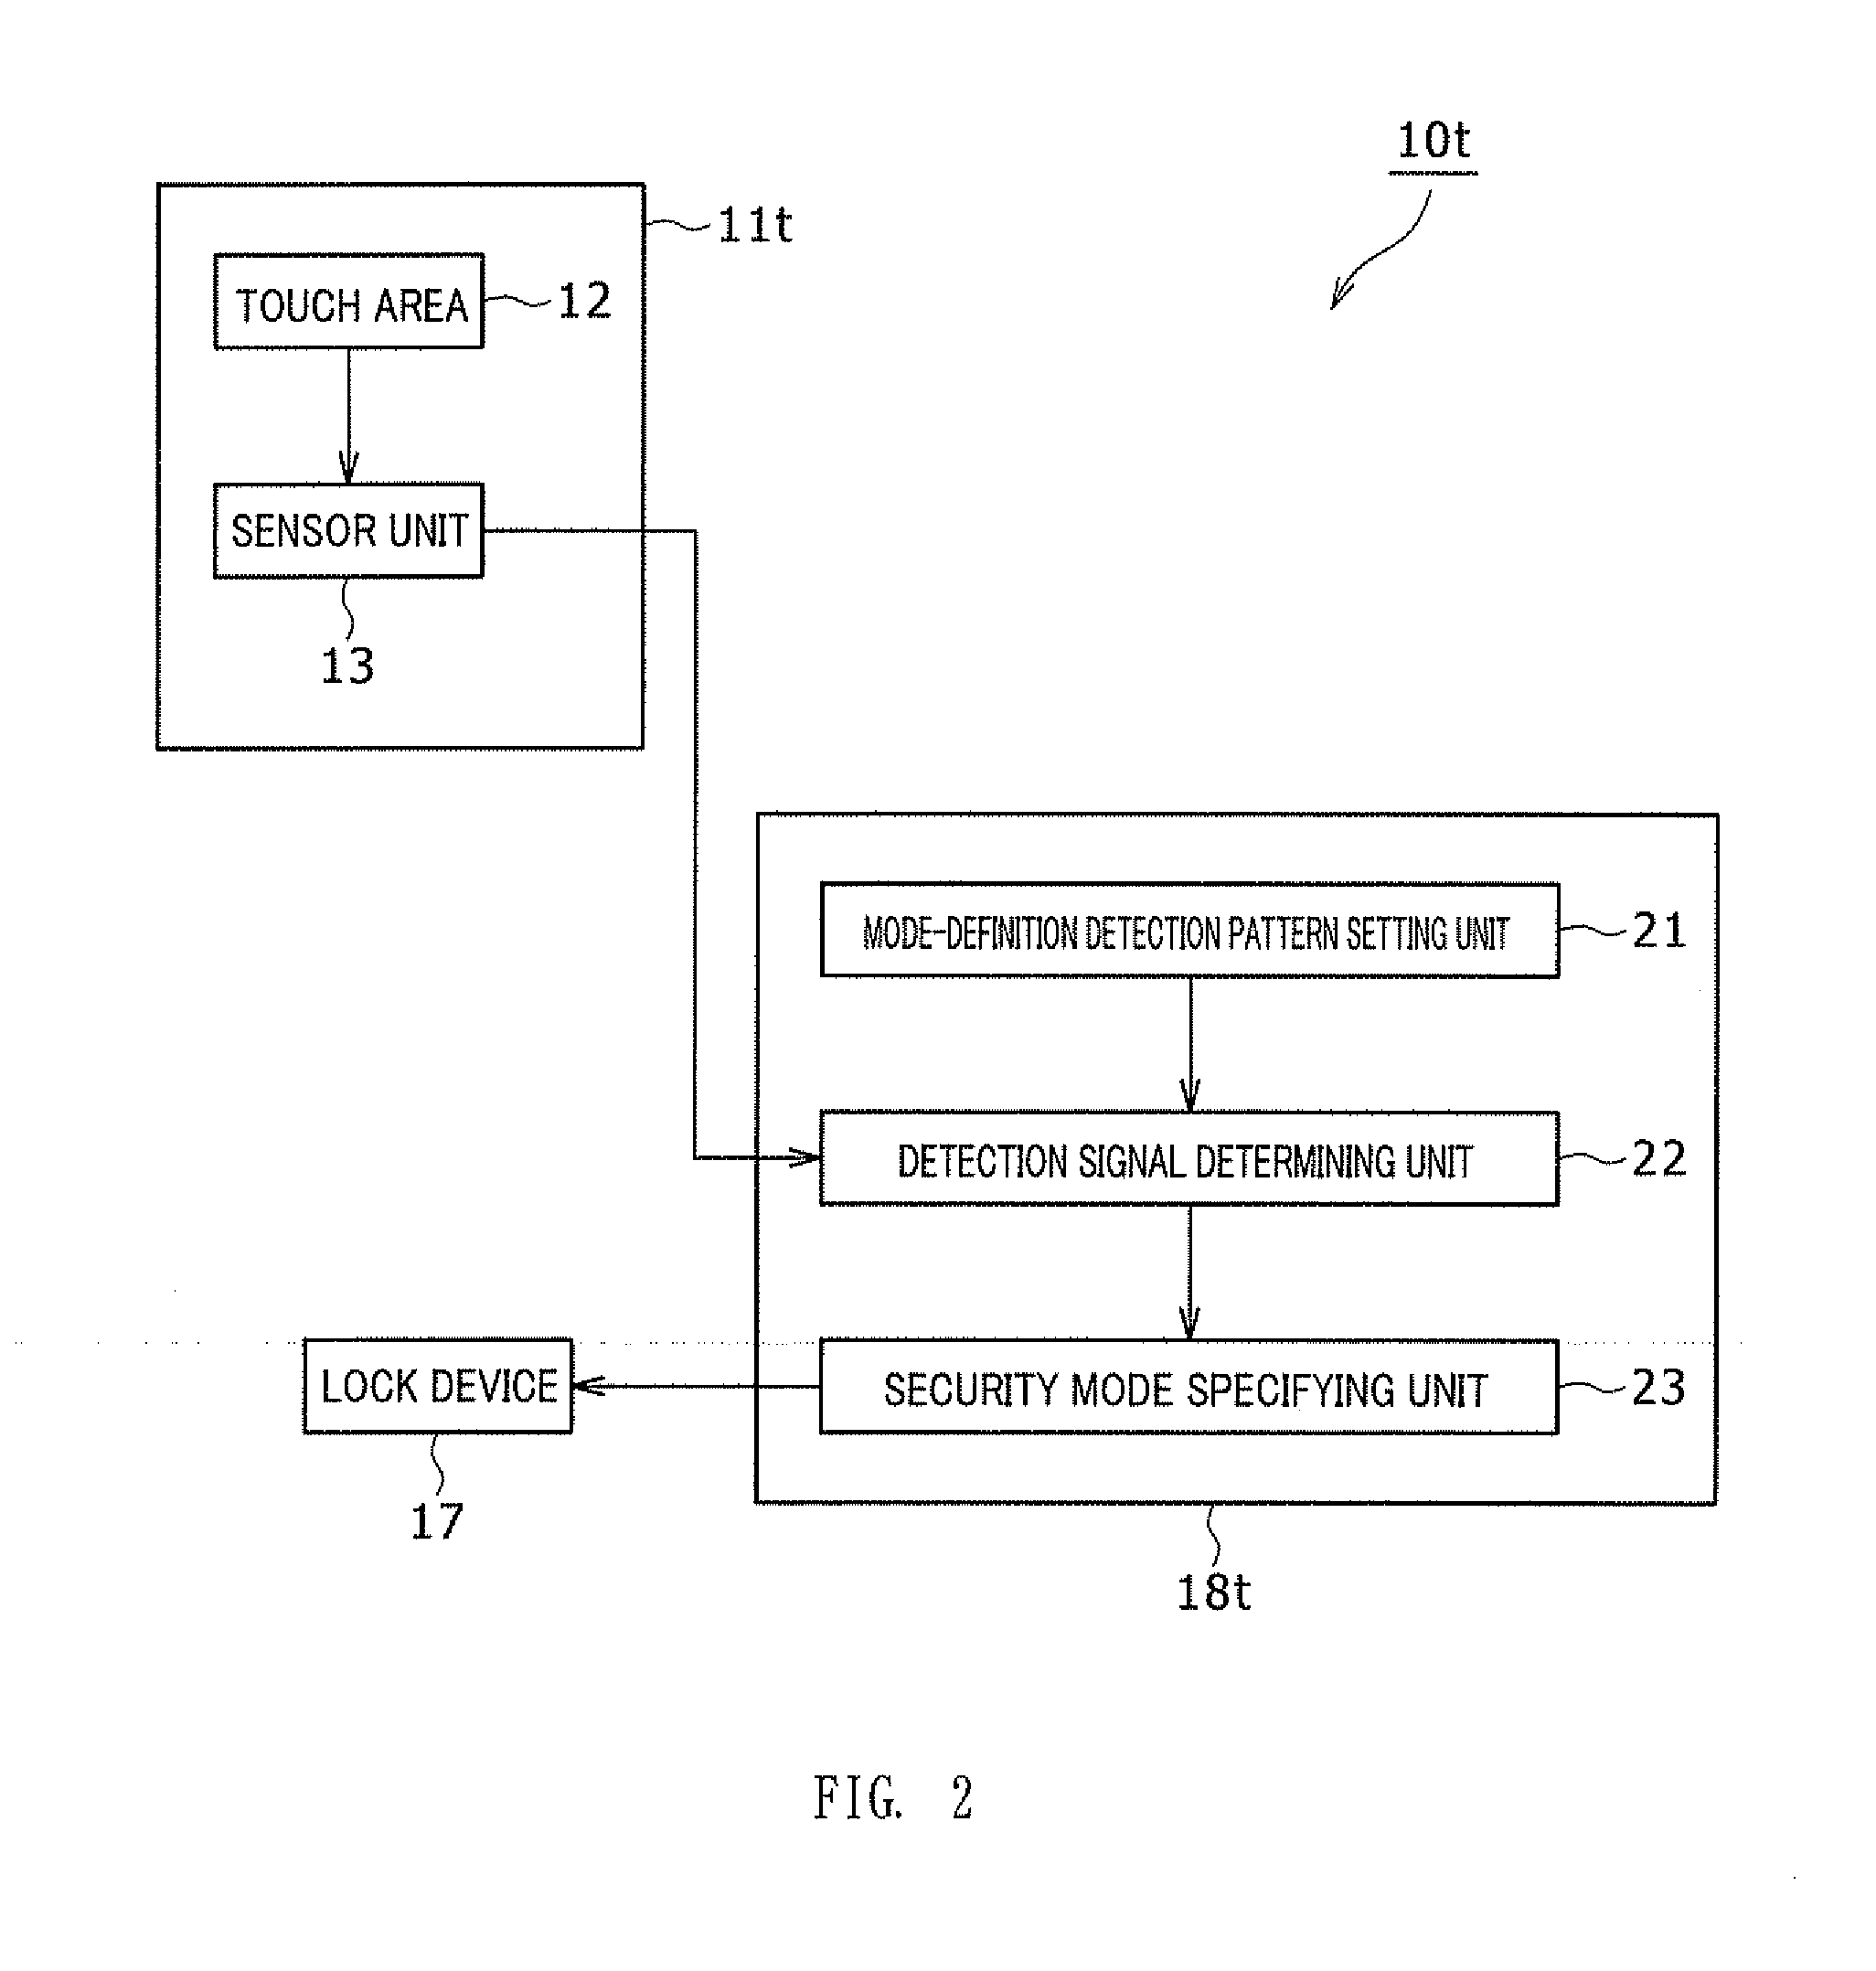 Contact detection device for vehicular use and security device for vehicular use